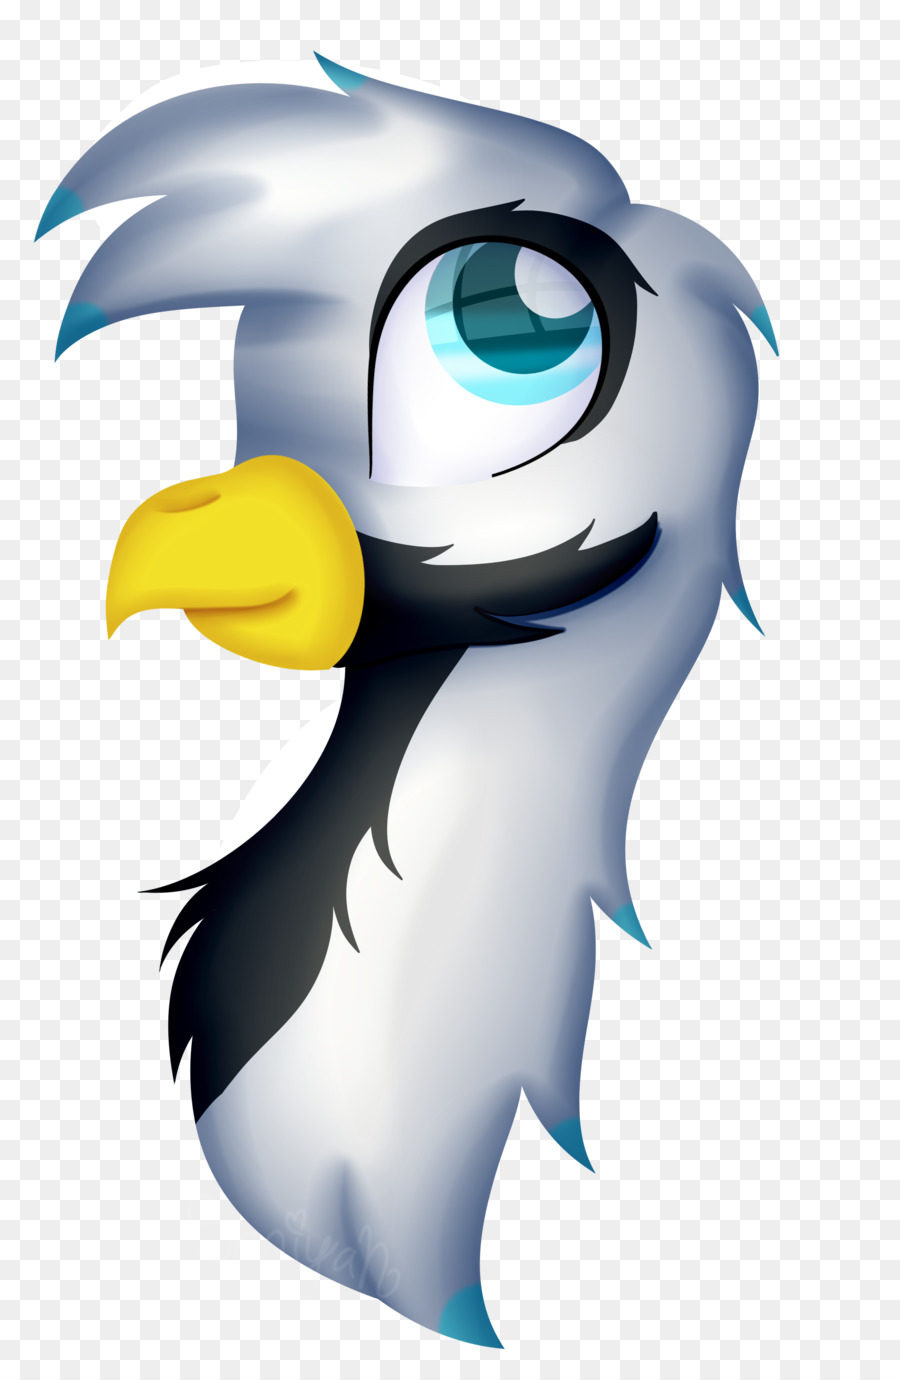 Penguin，Aves PNG